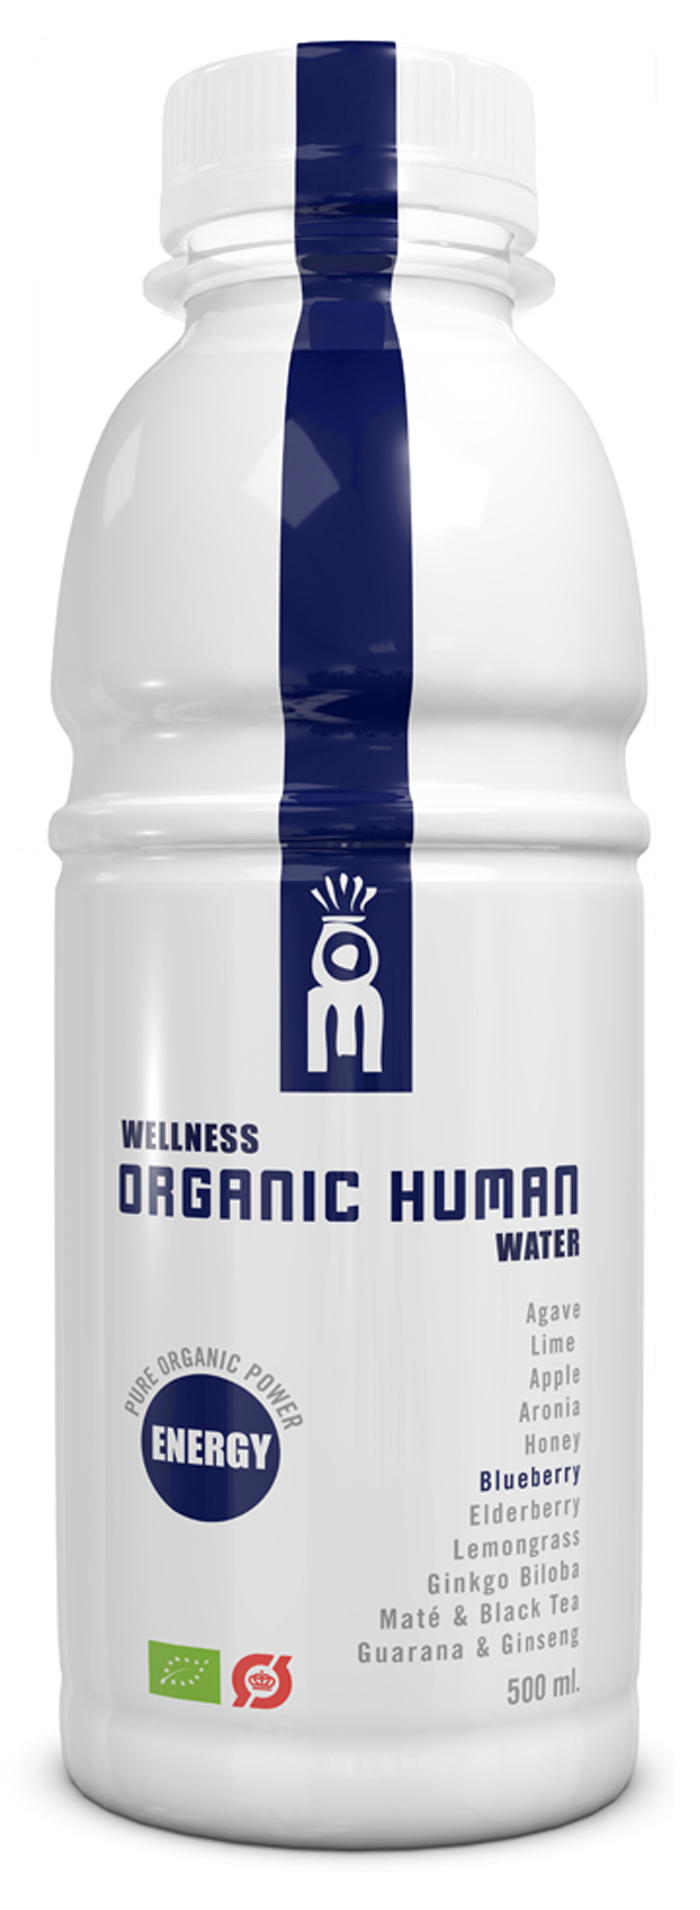 Examples, ideas and inspiration for the design of water labels and bottles. Packaging and labeling (part 1)